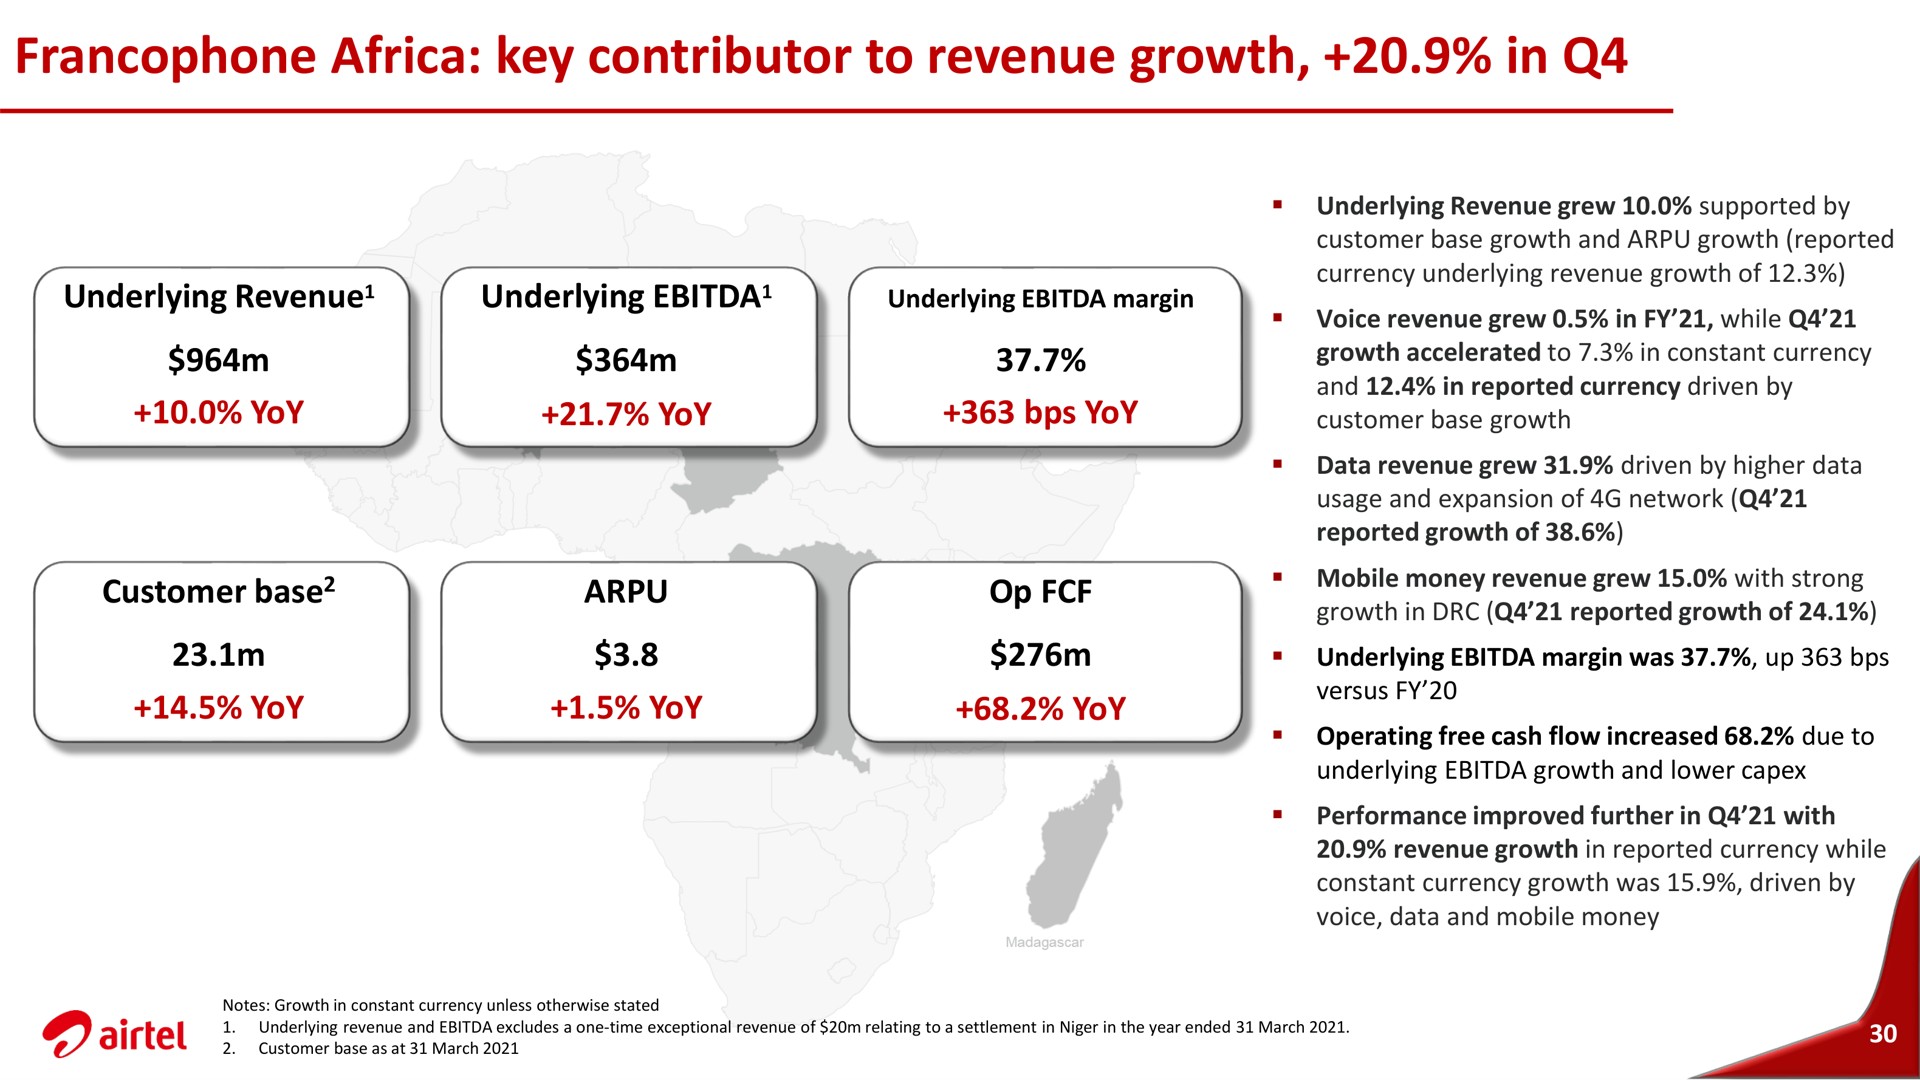 key contributor to revenue growth in | Airtel Africa